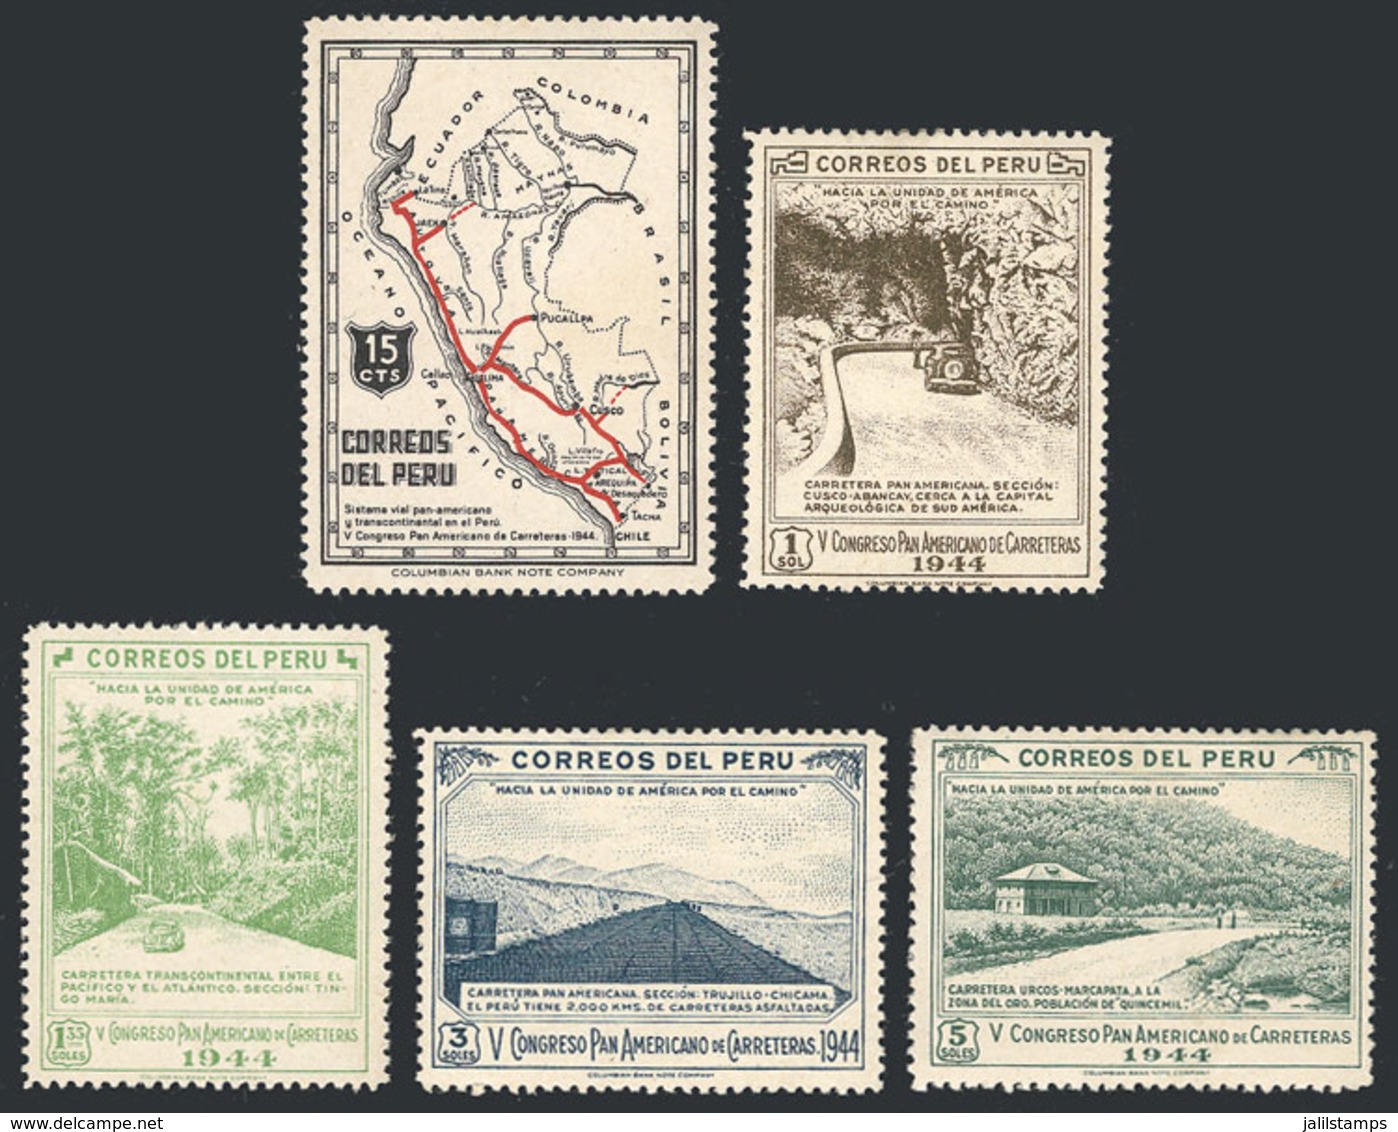 PERU: Sc.420/424, 1947 First National Congress Of Tourism, Complete Set Of 5 Values WITHOUT OVERPRINT, The Set Was Prepa - Peru